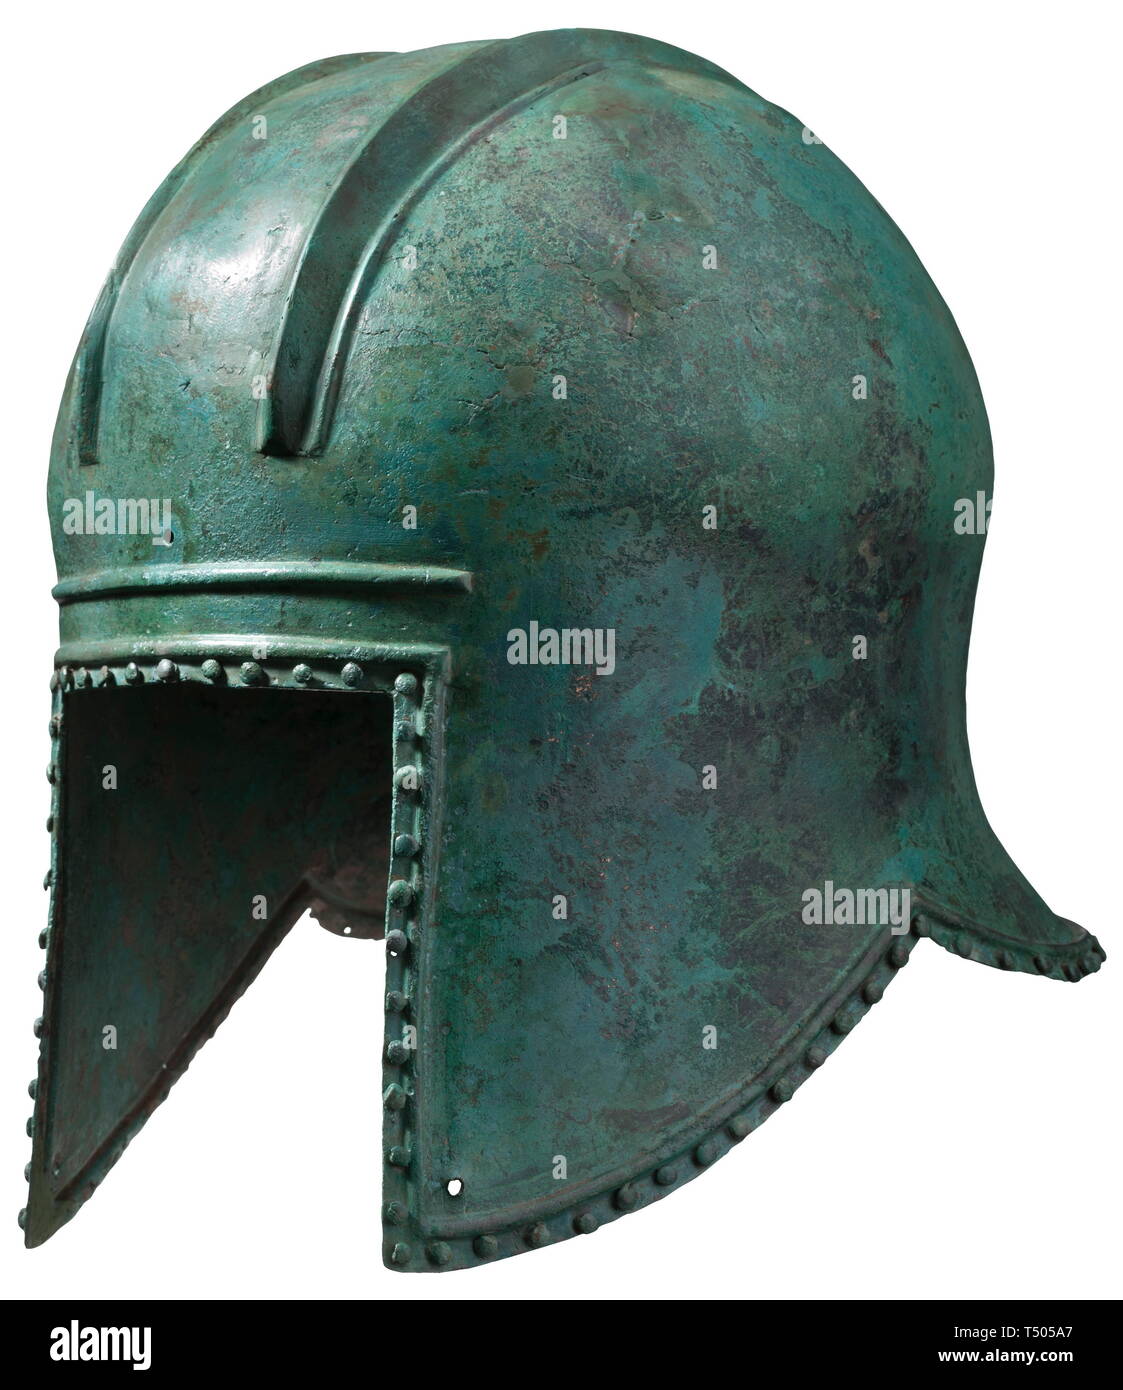 An Illyrian helmet, 6th century BC. Bronze with light green patina. Tall, large skull with two raised parallel ridges for the crest and attachment holes at front and back. Large face-opening surmounted by a narrow rib across the brow. Long pierced cheek-pieces and beautifully flared neck-guard. A row of lenticular decorative pins around the perimeter. Replacements and restorations at the crown and around the edges. Height 24 cm, weight 857 g. Provenance: German private collection, 1970s. historic, historical, ancient world, ancient times, Greek, , Additional-Rights-Clearance-Info-Not-Available Stock Photo